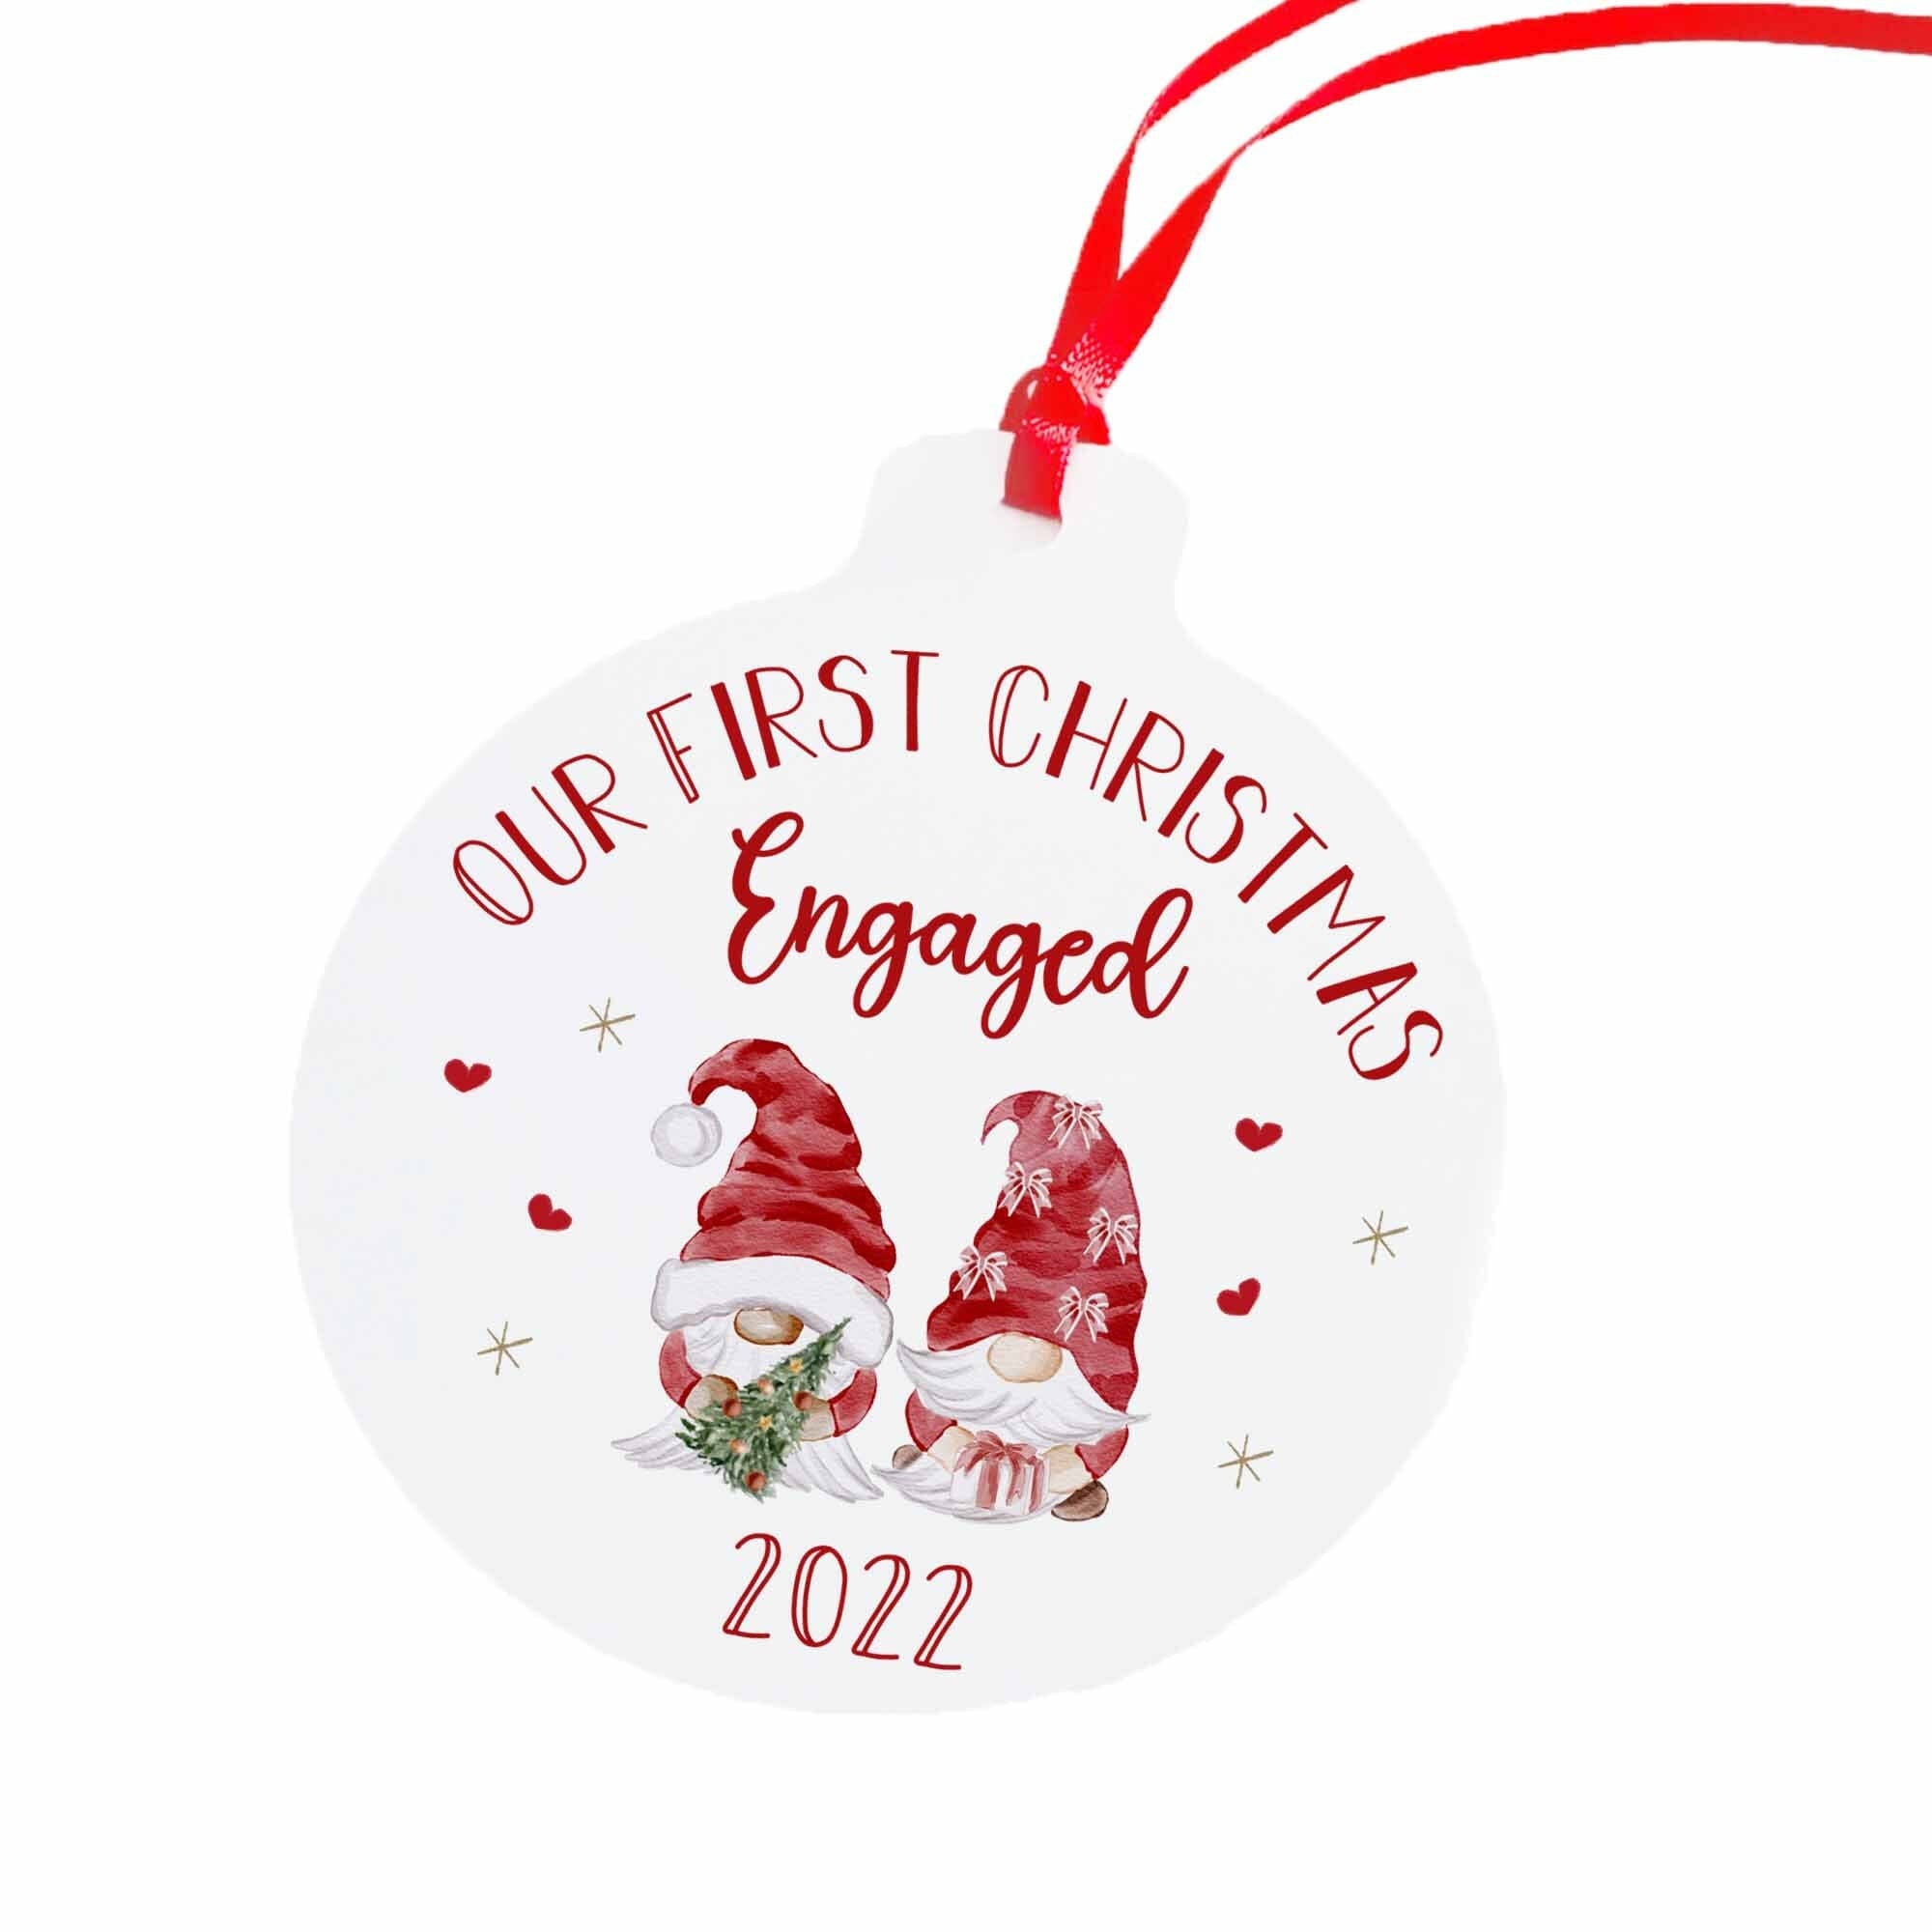 Our First Christmas Engaged Metal Ornament With Gnomes, Xmas Decor With Cute Gonks